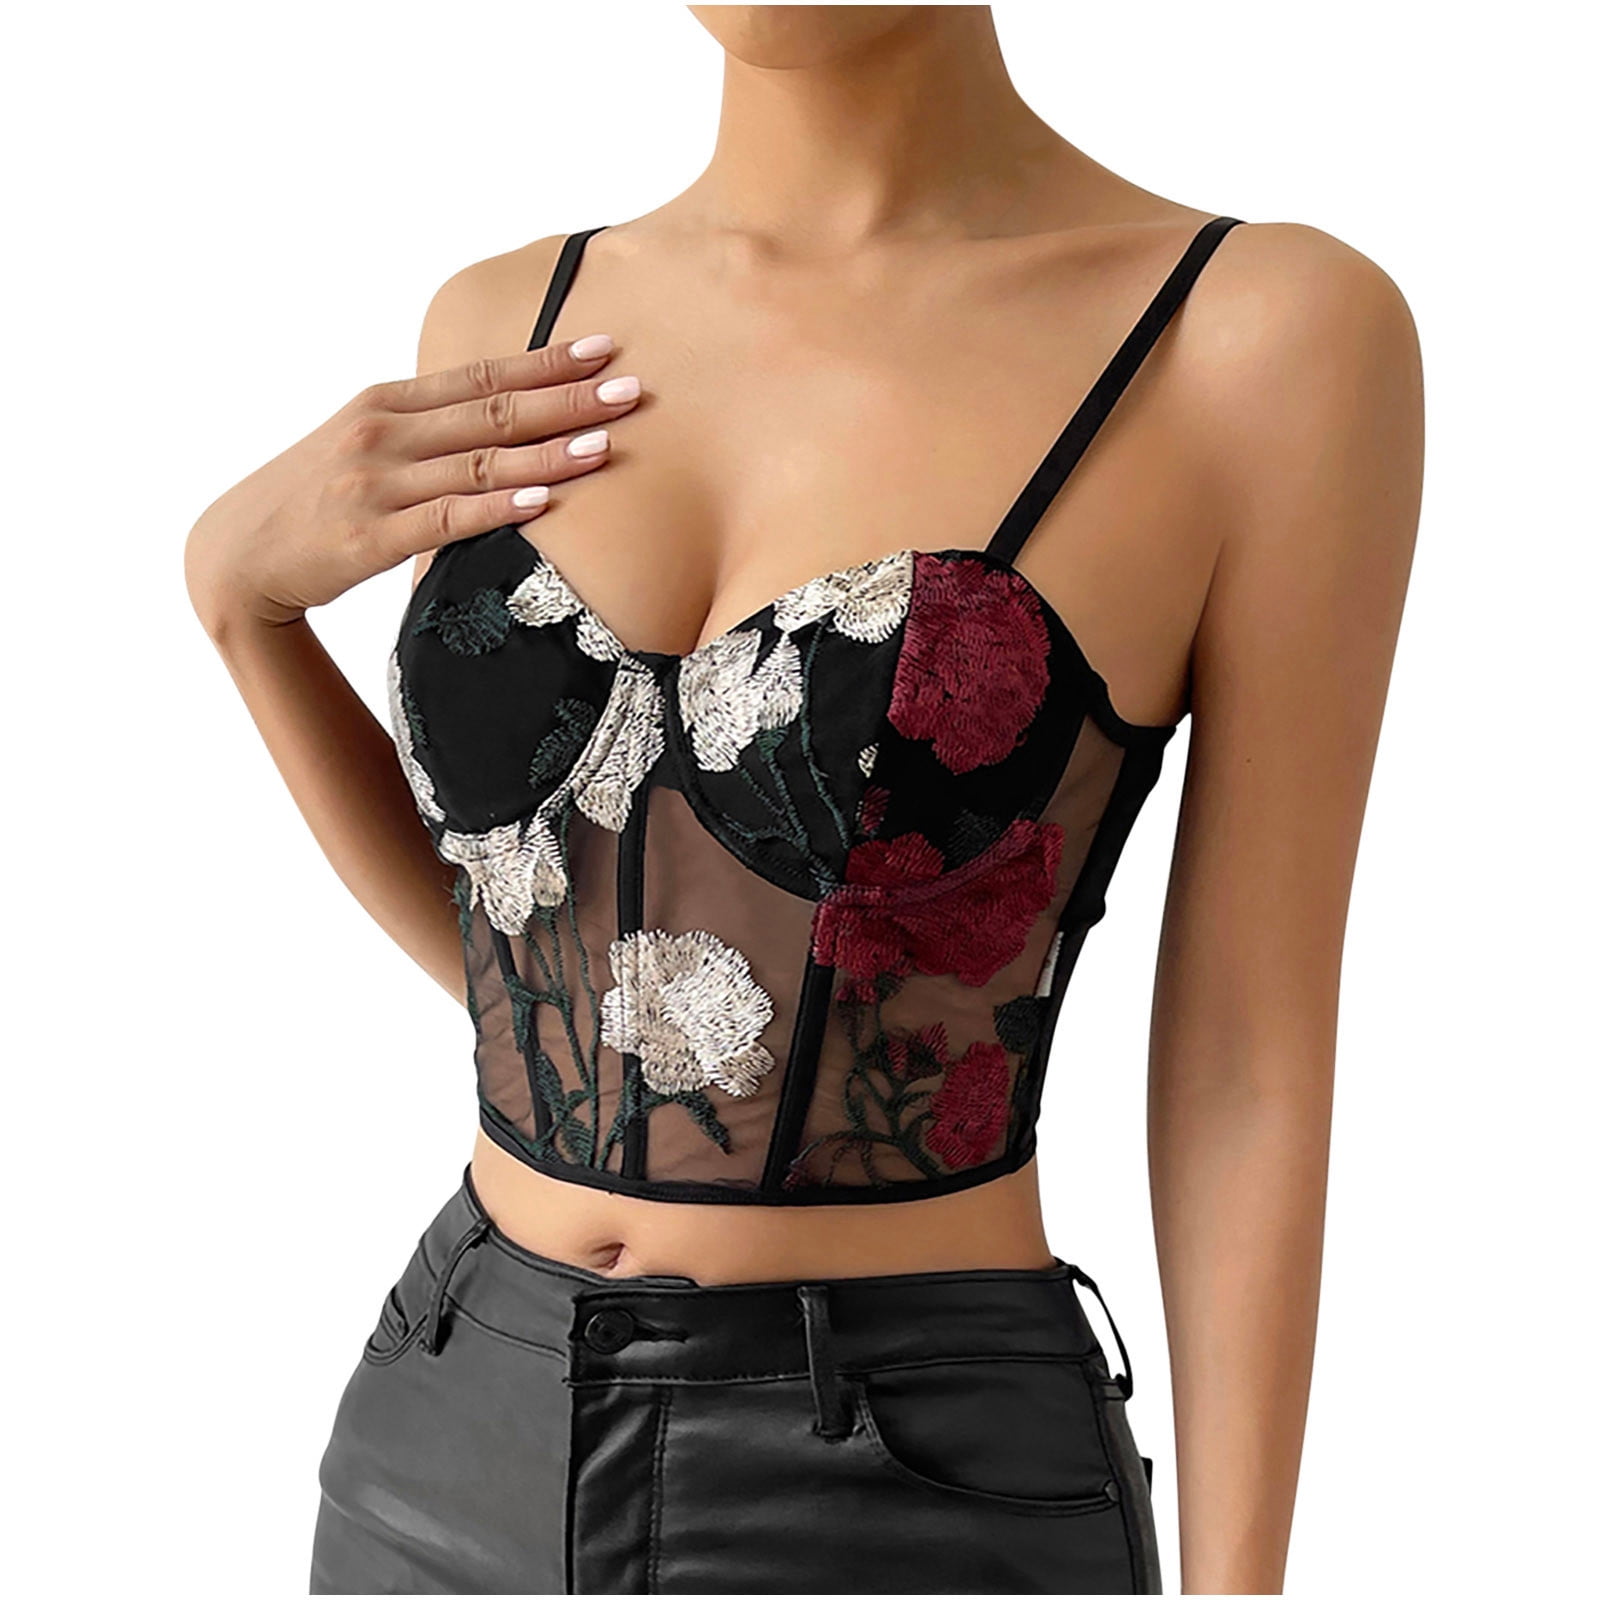 YYDGH Women's Floral Embroidery Contrast Lace Cami Crop Top Spaghetti Strap  Sheer Mesh Corset Bustier Tops Bralette Black XS